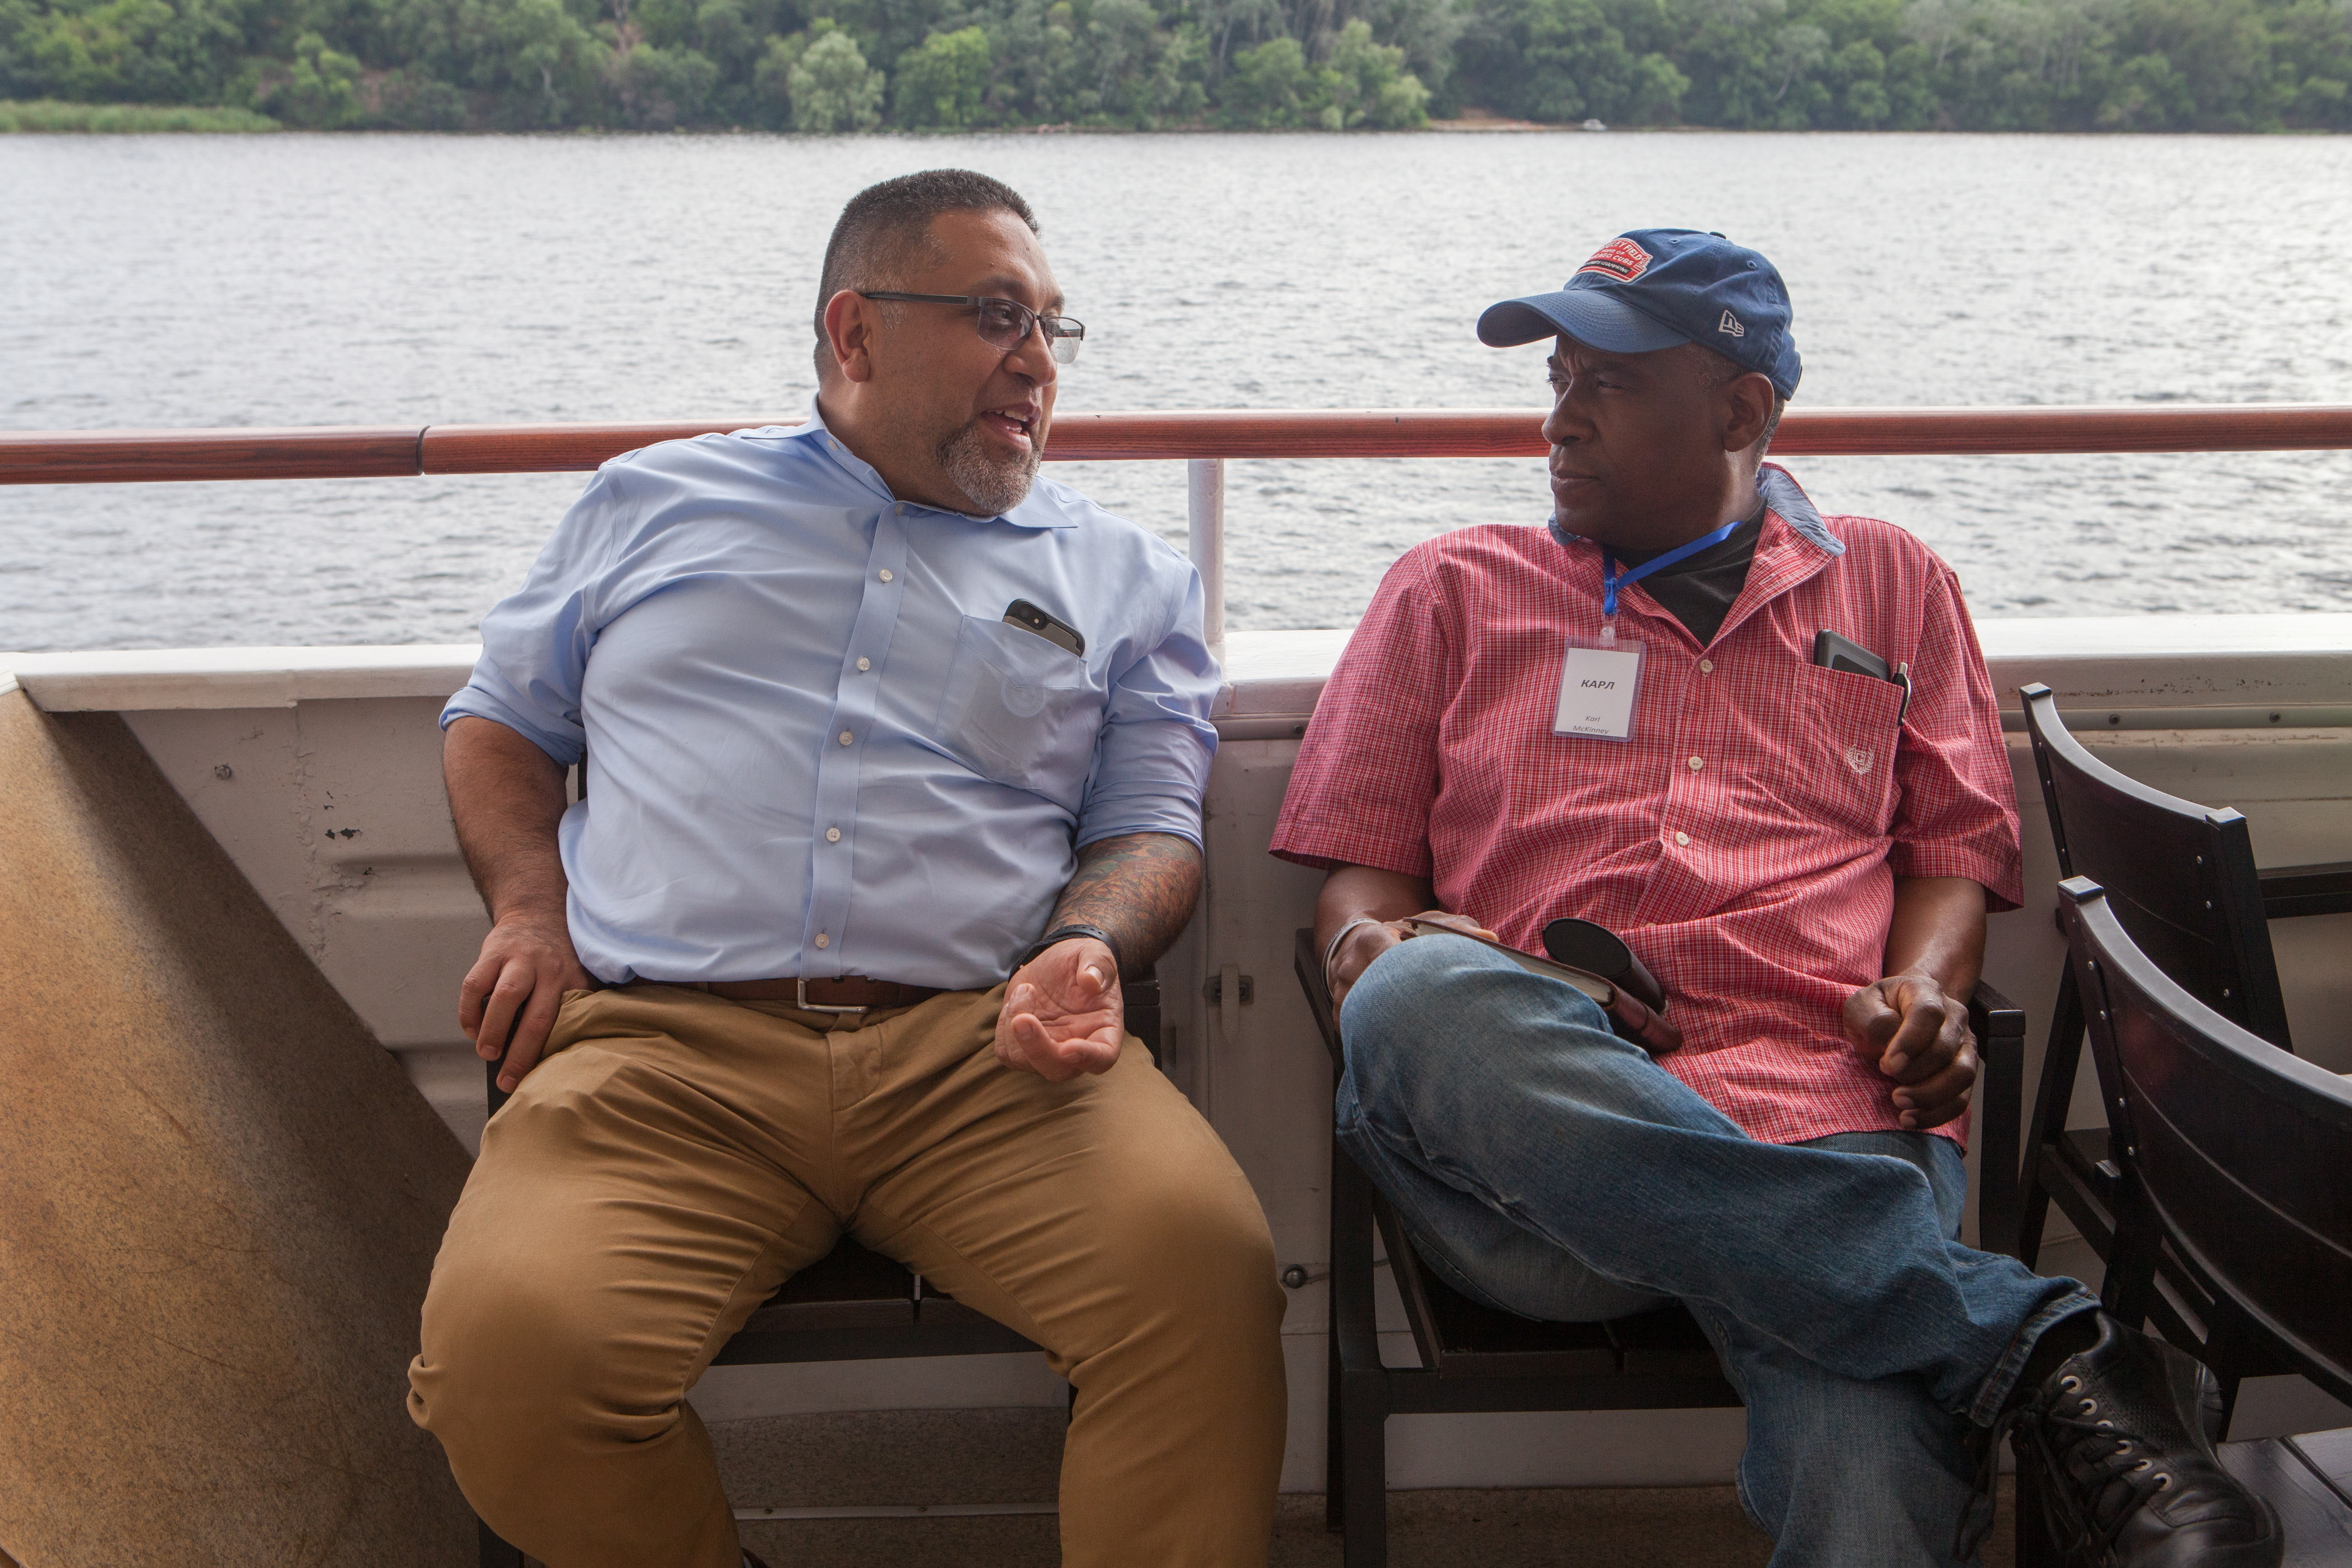 Two men sit near the railing of a boat. They are talking to each other.